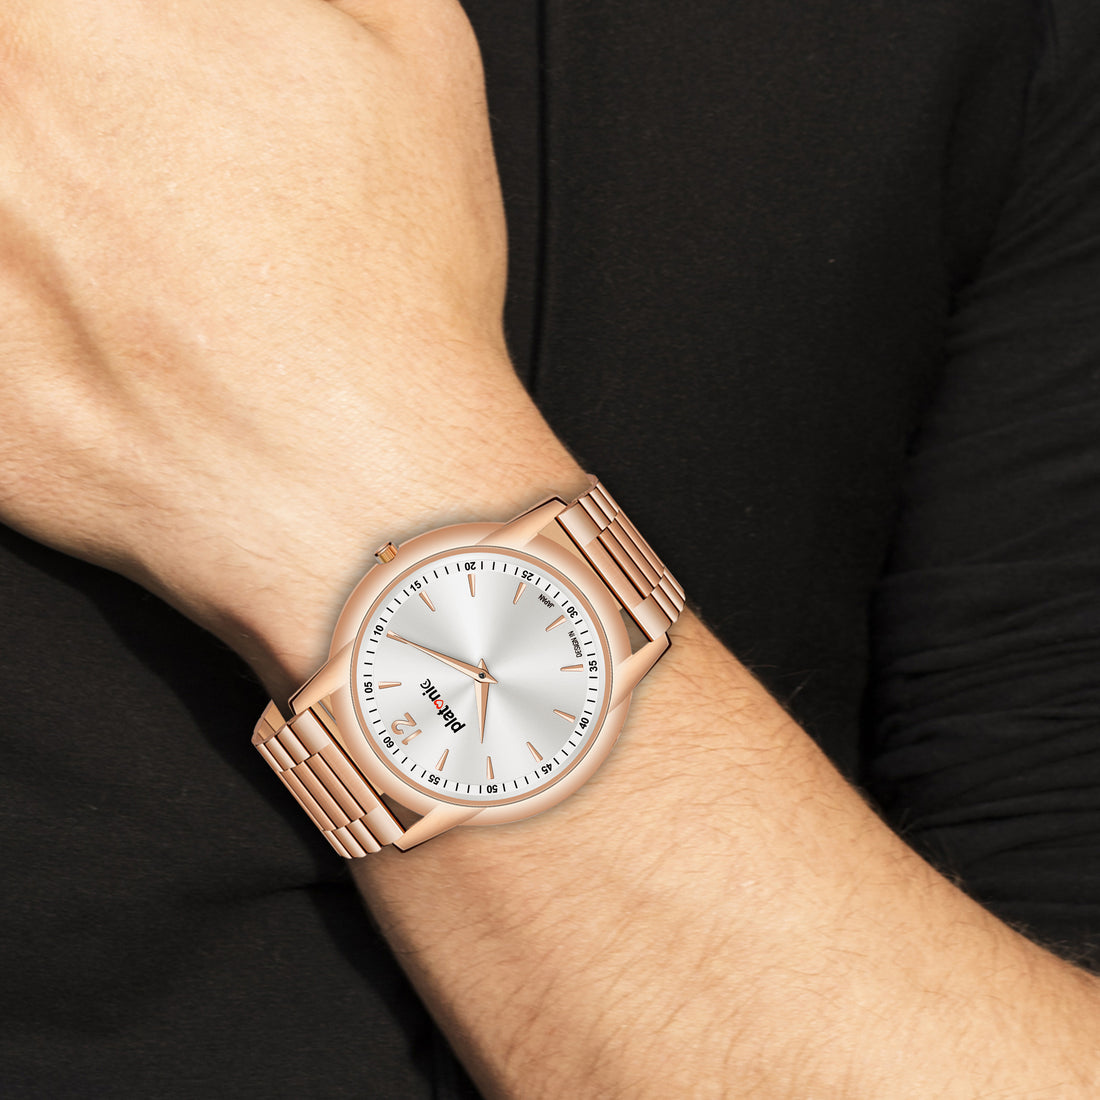 The Platonic Watch: A Timepiece That Defines Love and Friendship